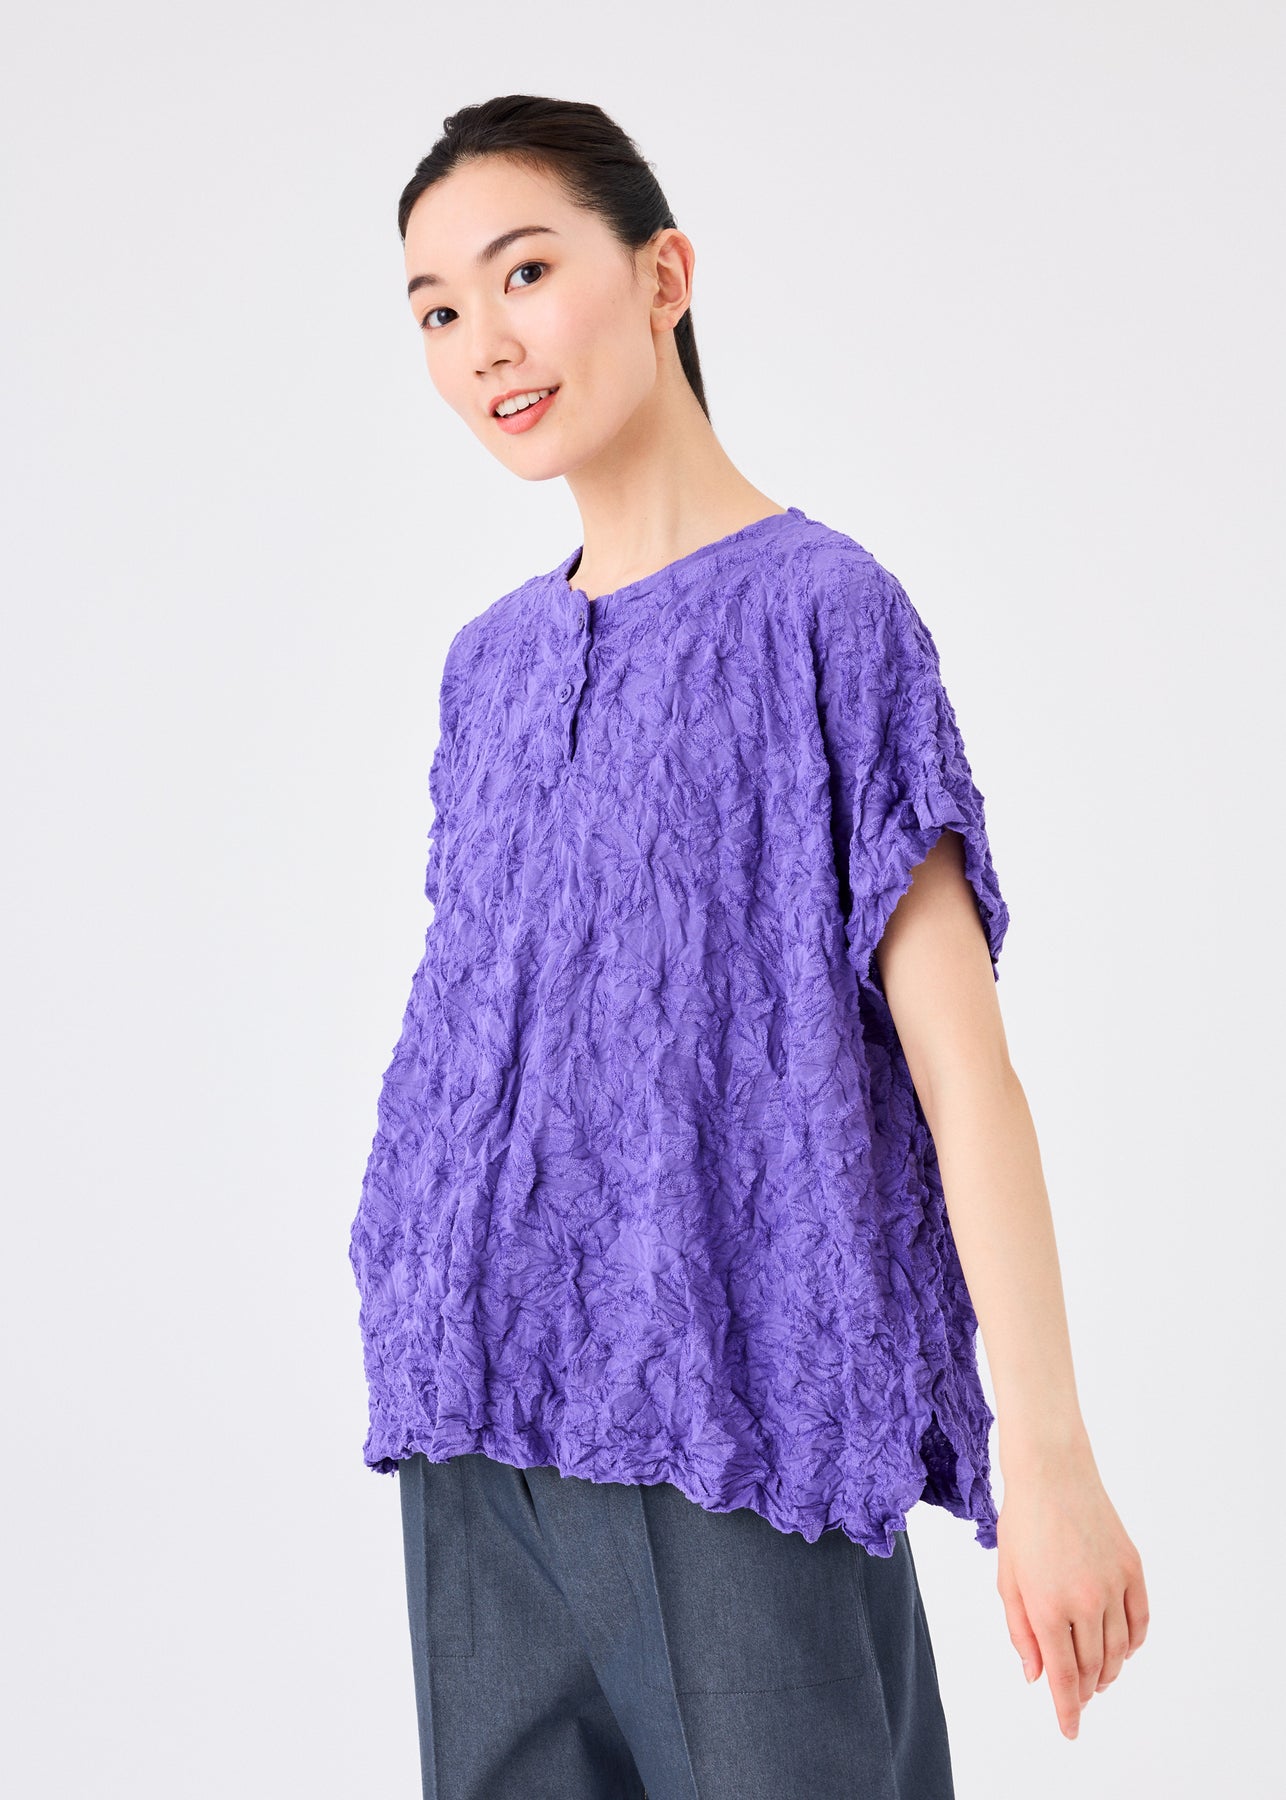 GEOMETRIC FARM PILE MERINGUE TOP | The official ISSEY MIYAKE